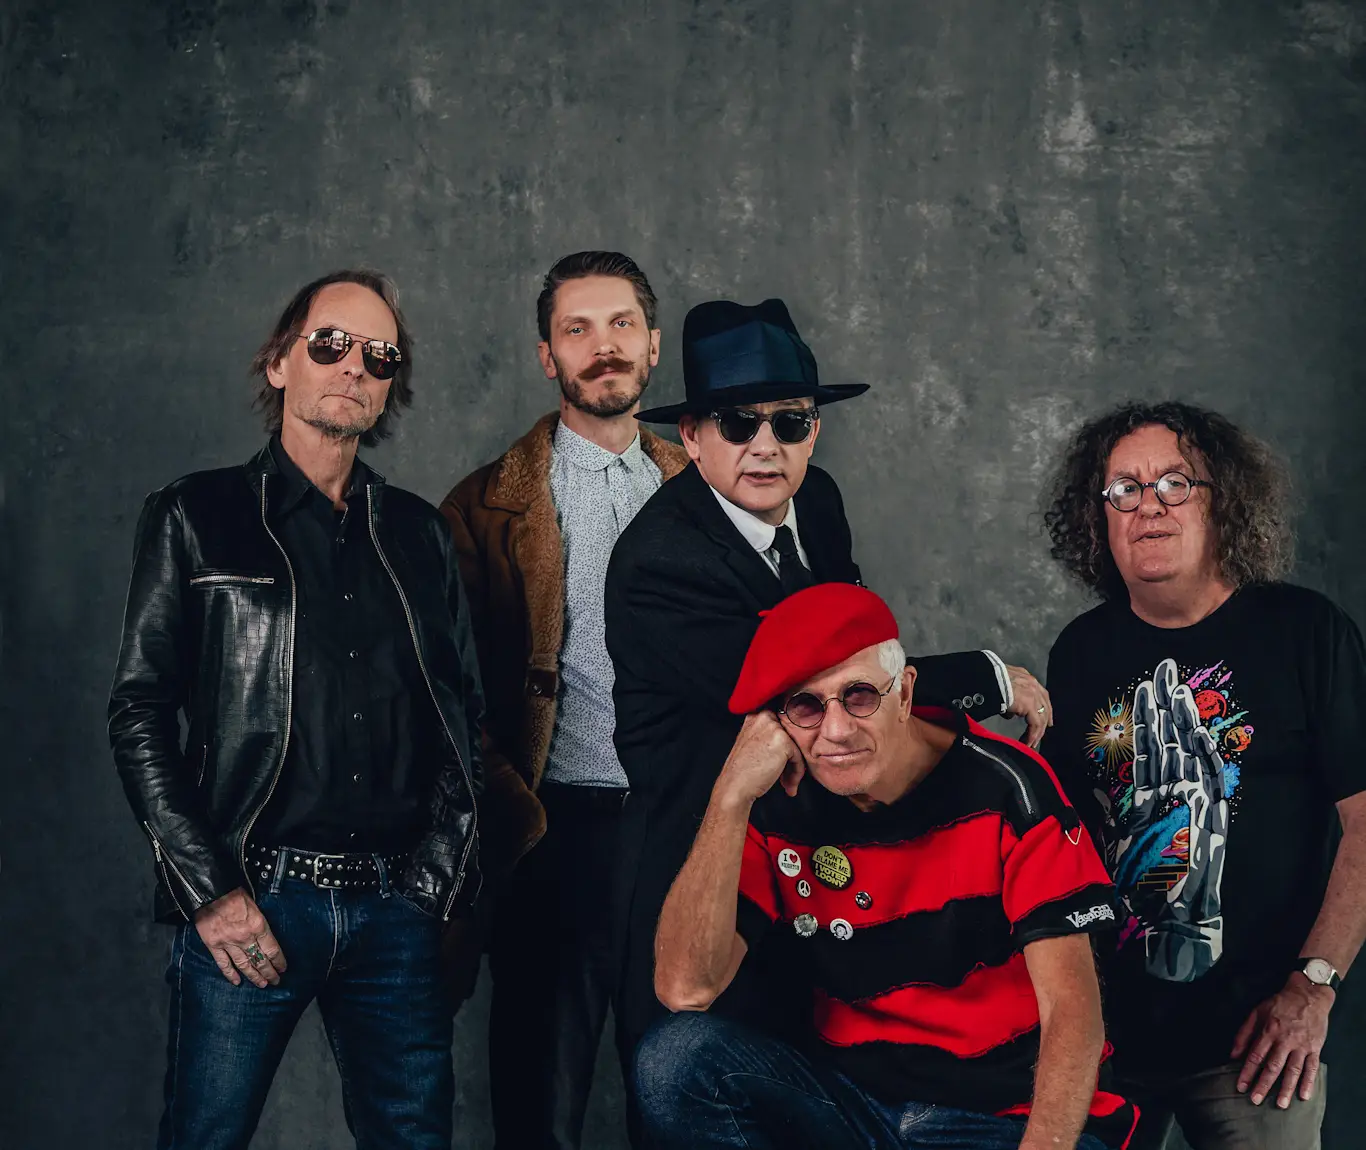 THE DAMNED release new single and video – ‘You’re Gonna Realise’ from new album Darkadelic